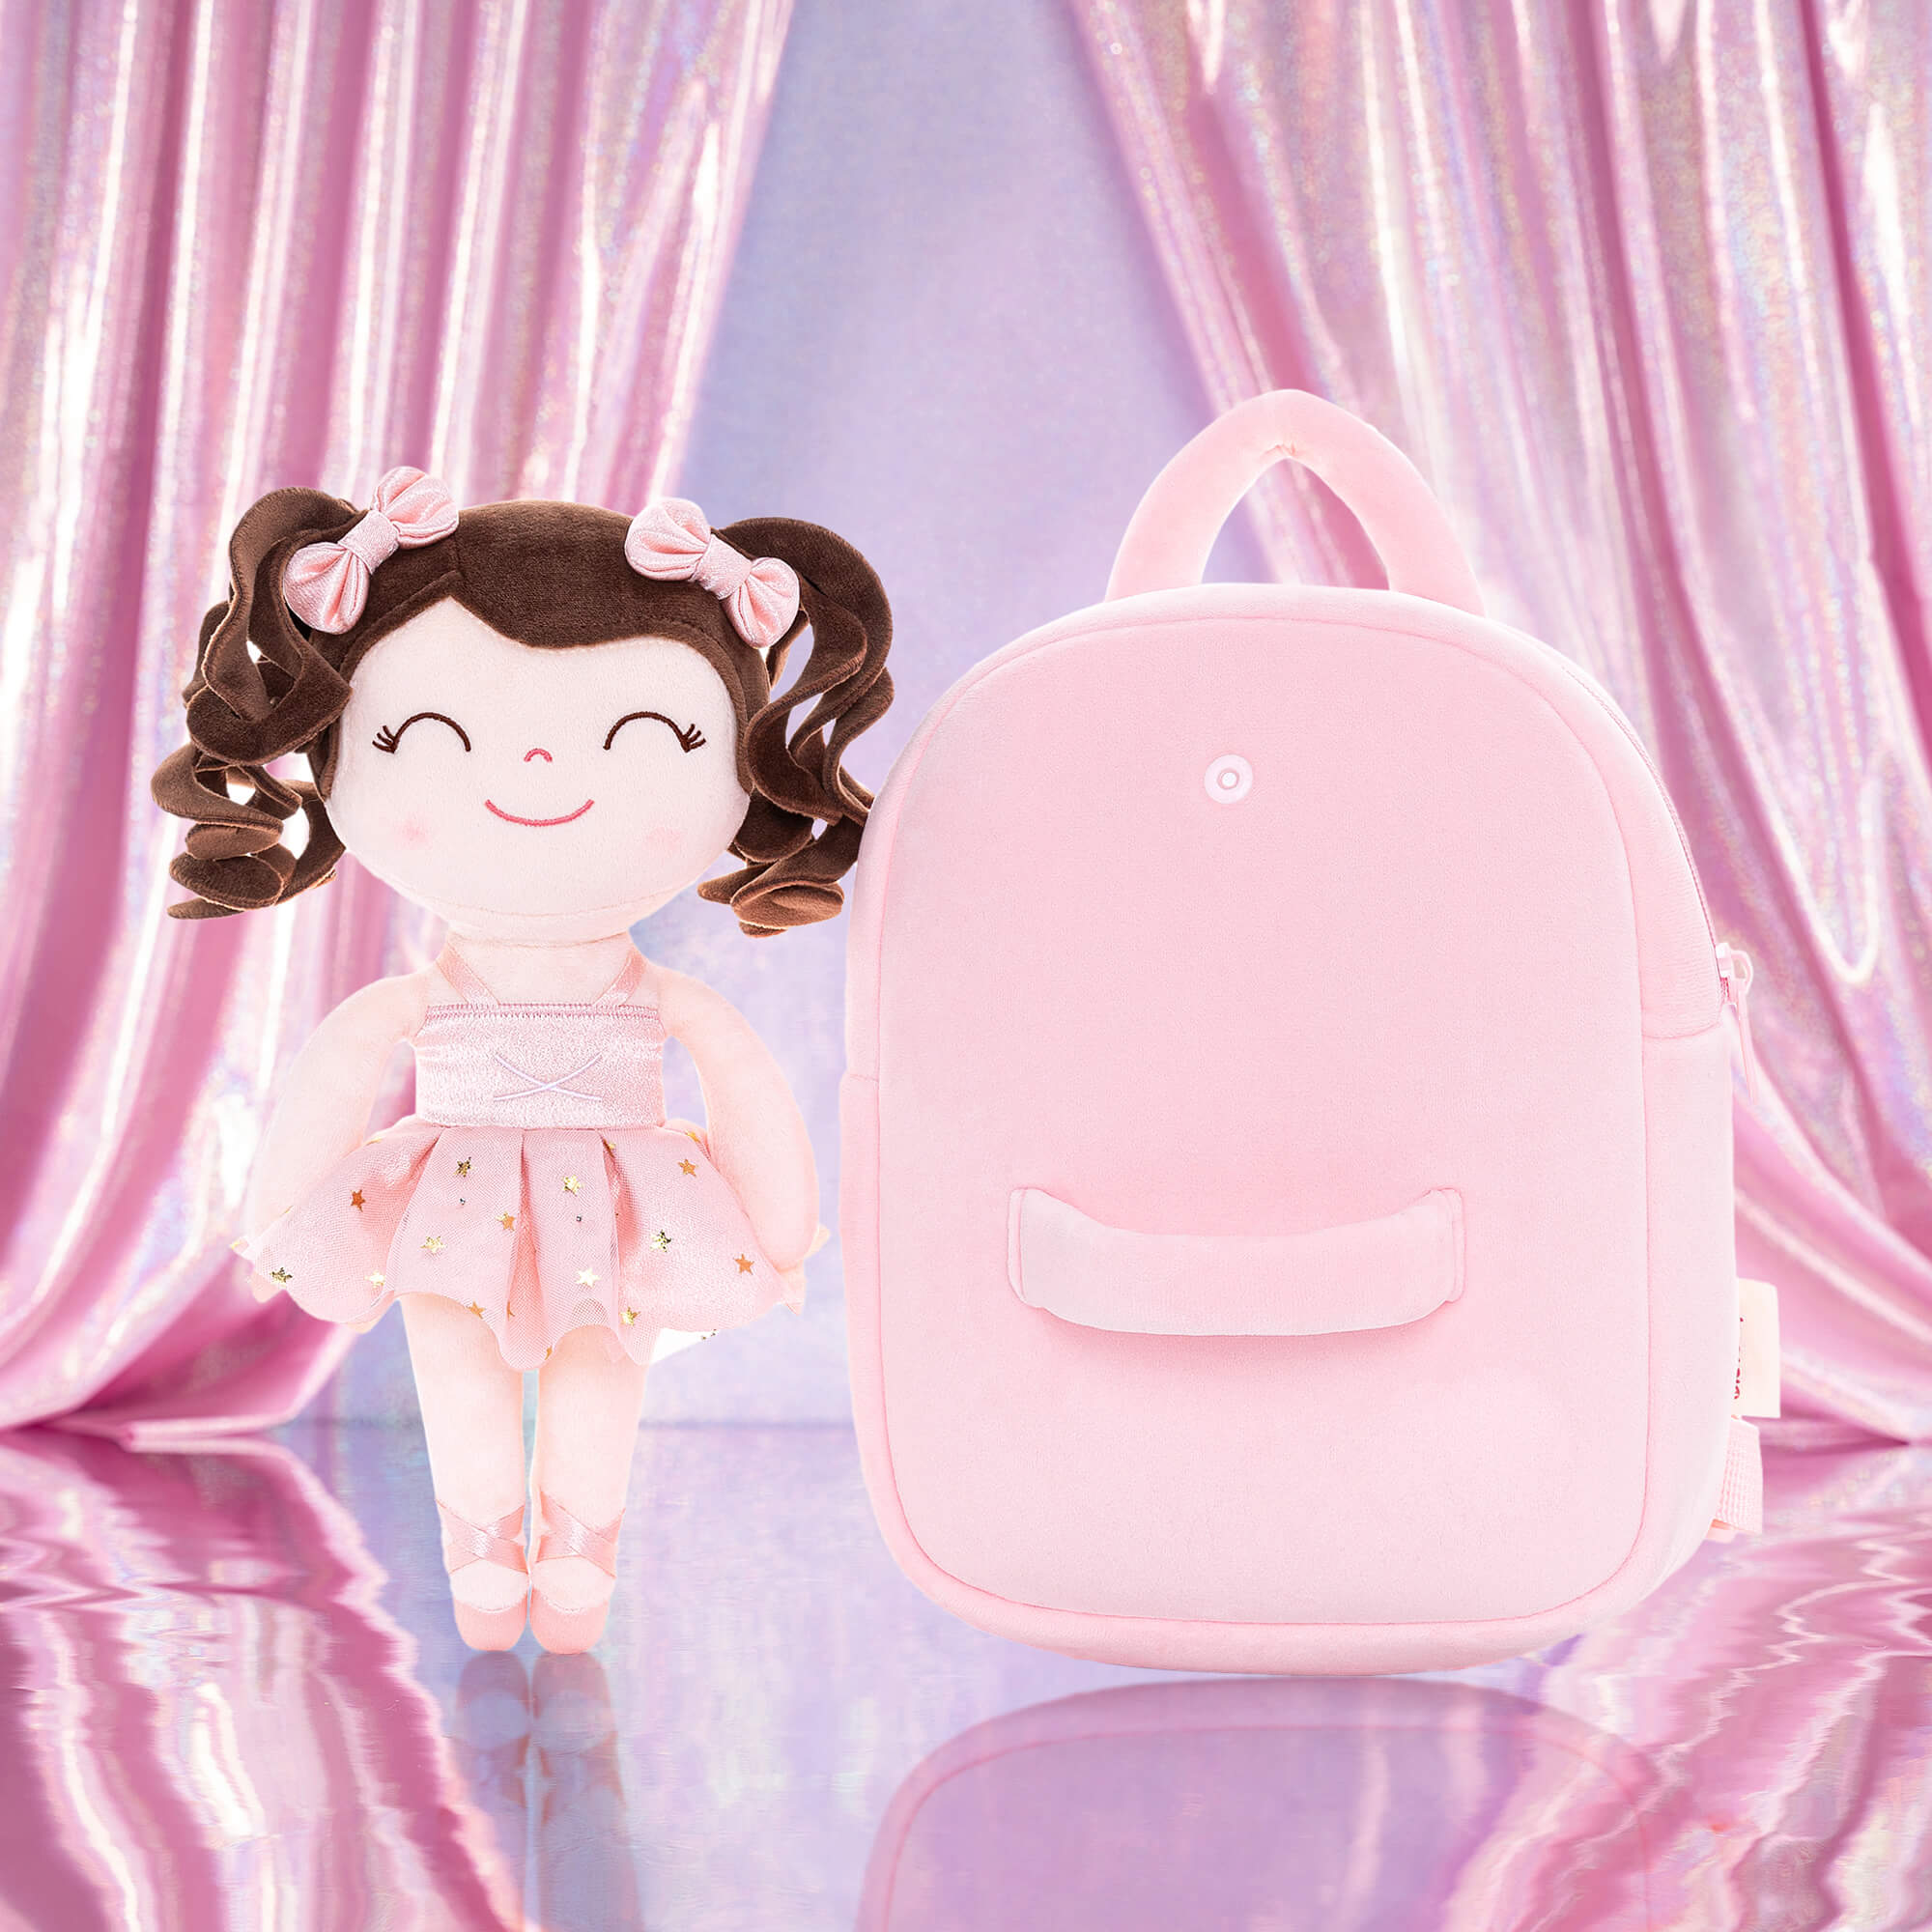 Gloveleya 9-inch Personalized Plush Curly Ballet Girl Dolls Backpack Champagne Pink Ballet Dream